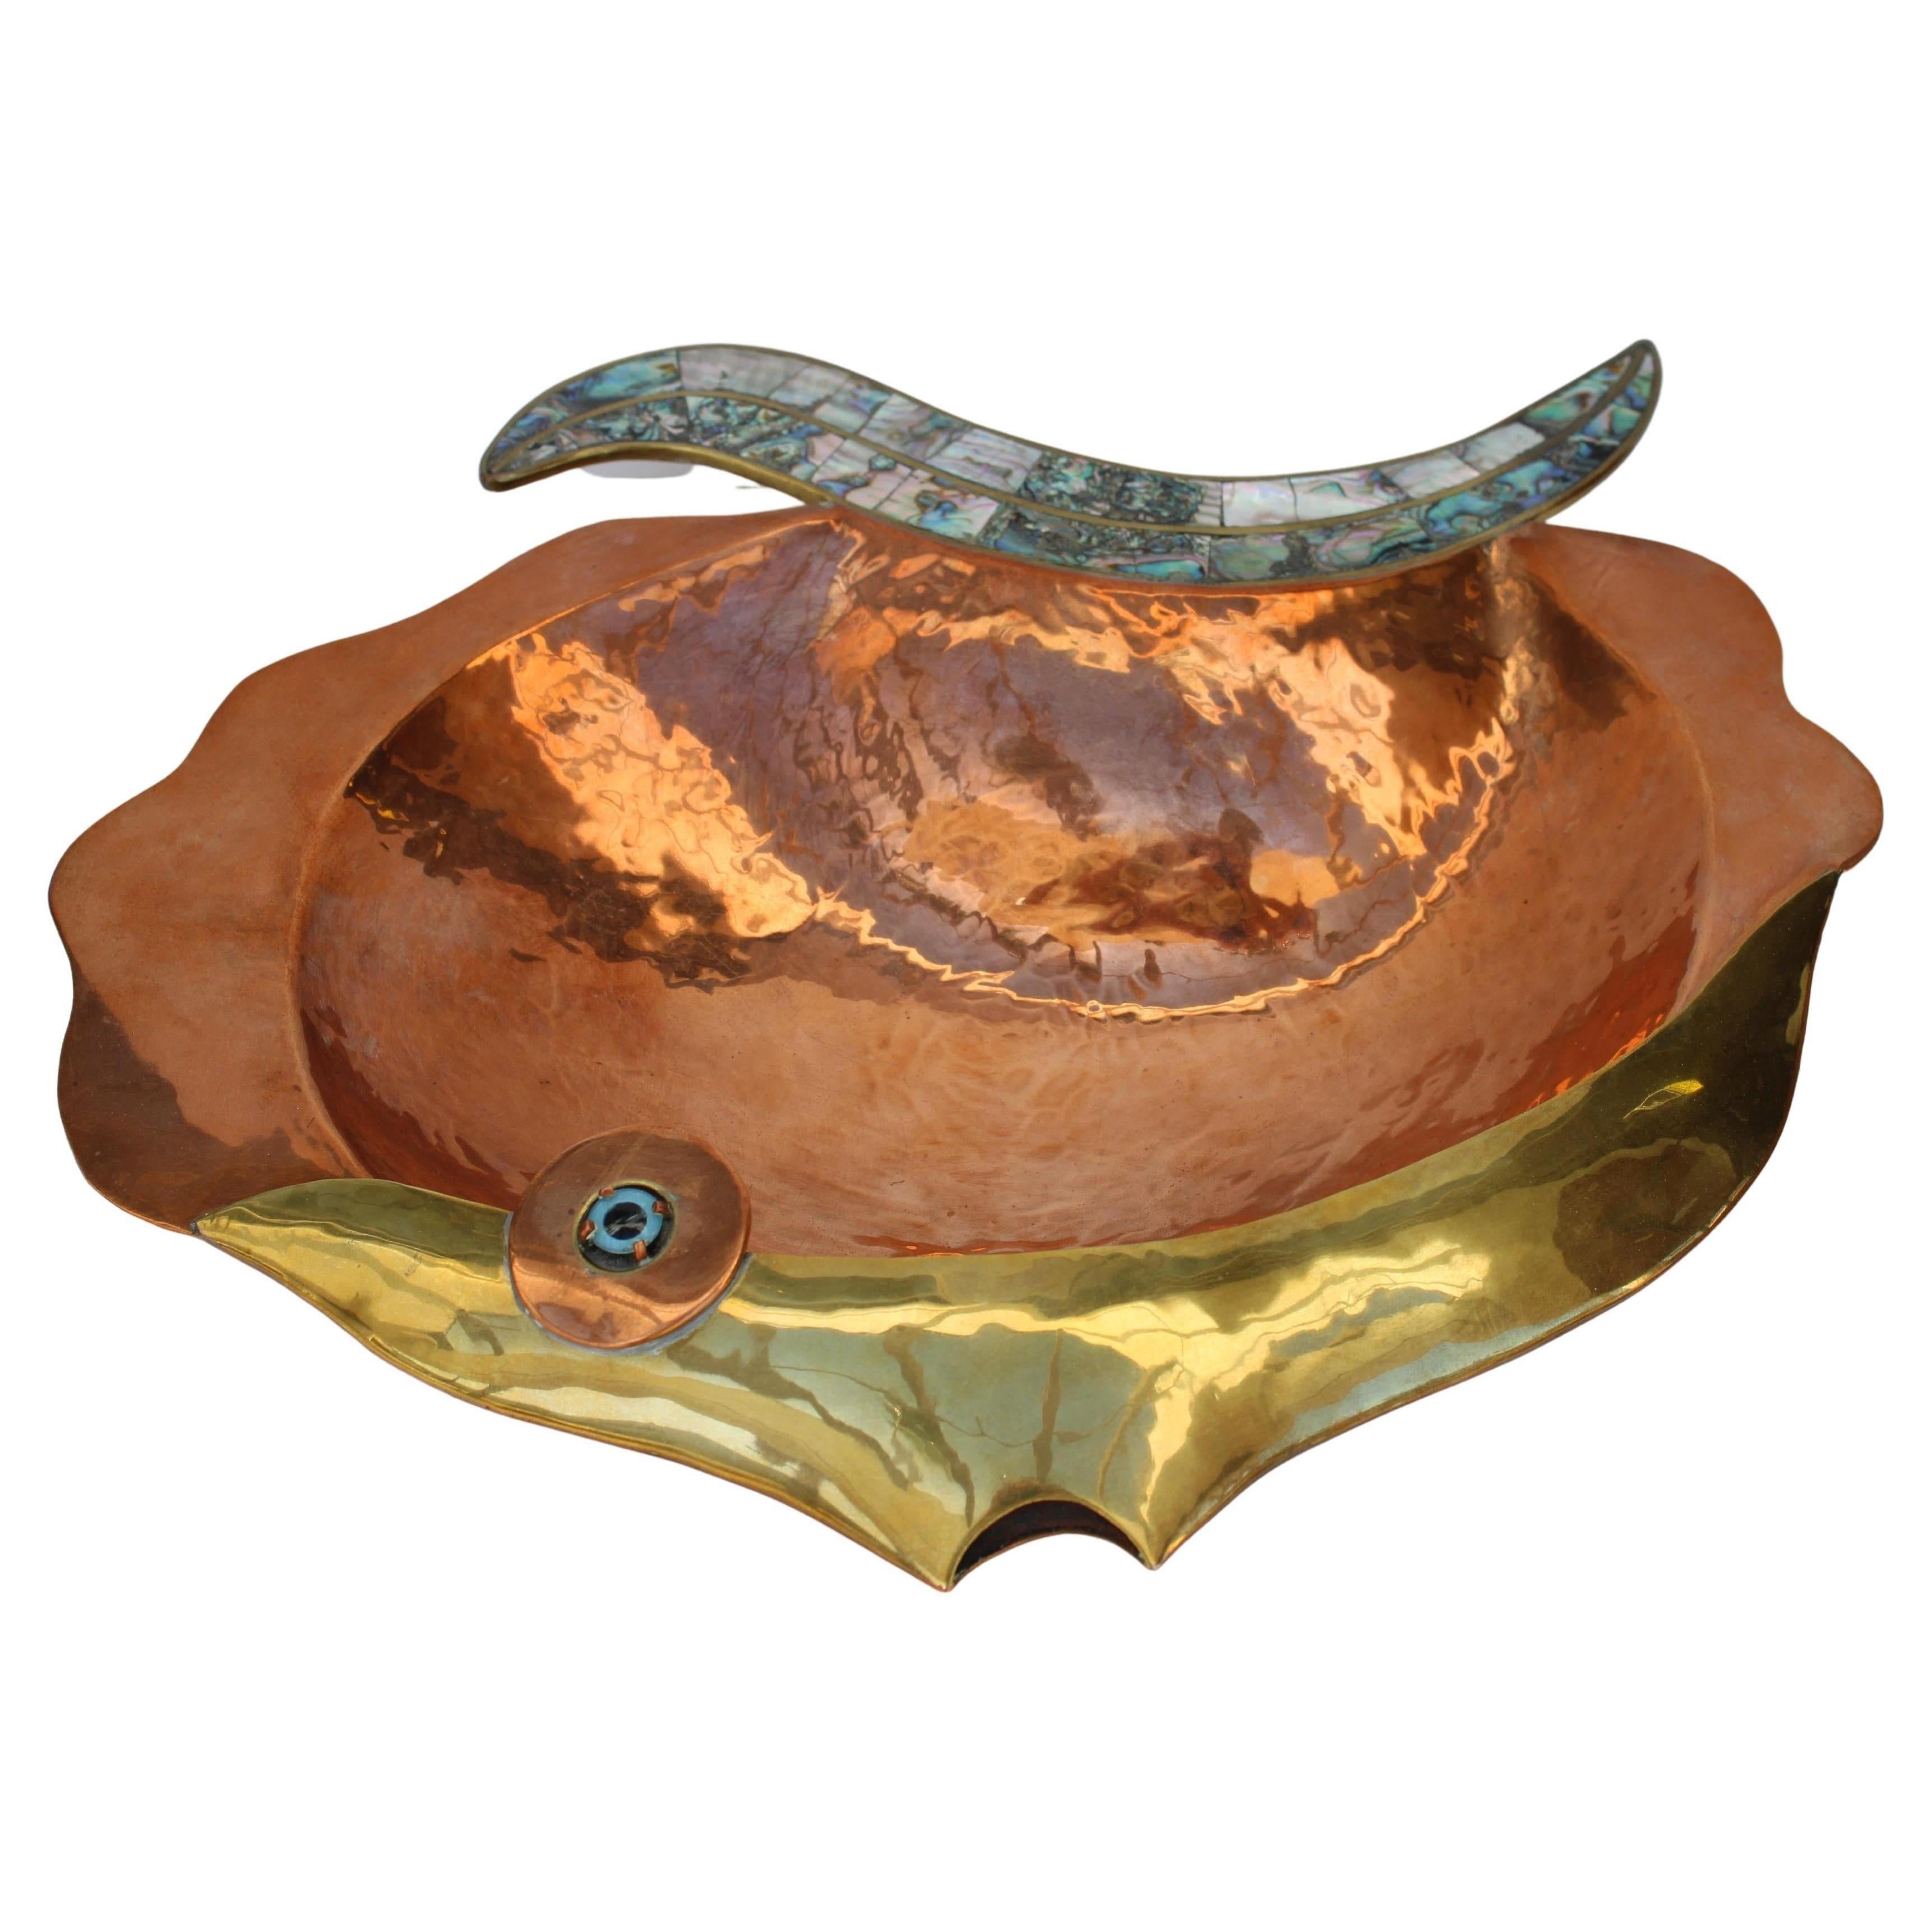 Copper and abalone angel fish centerpiece dish from Mexico.  Tray measures 23